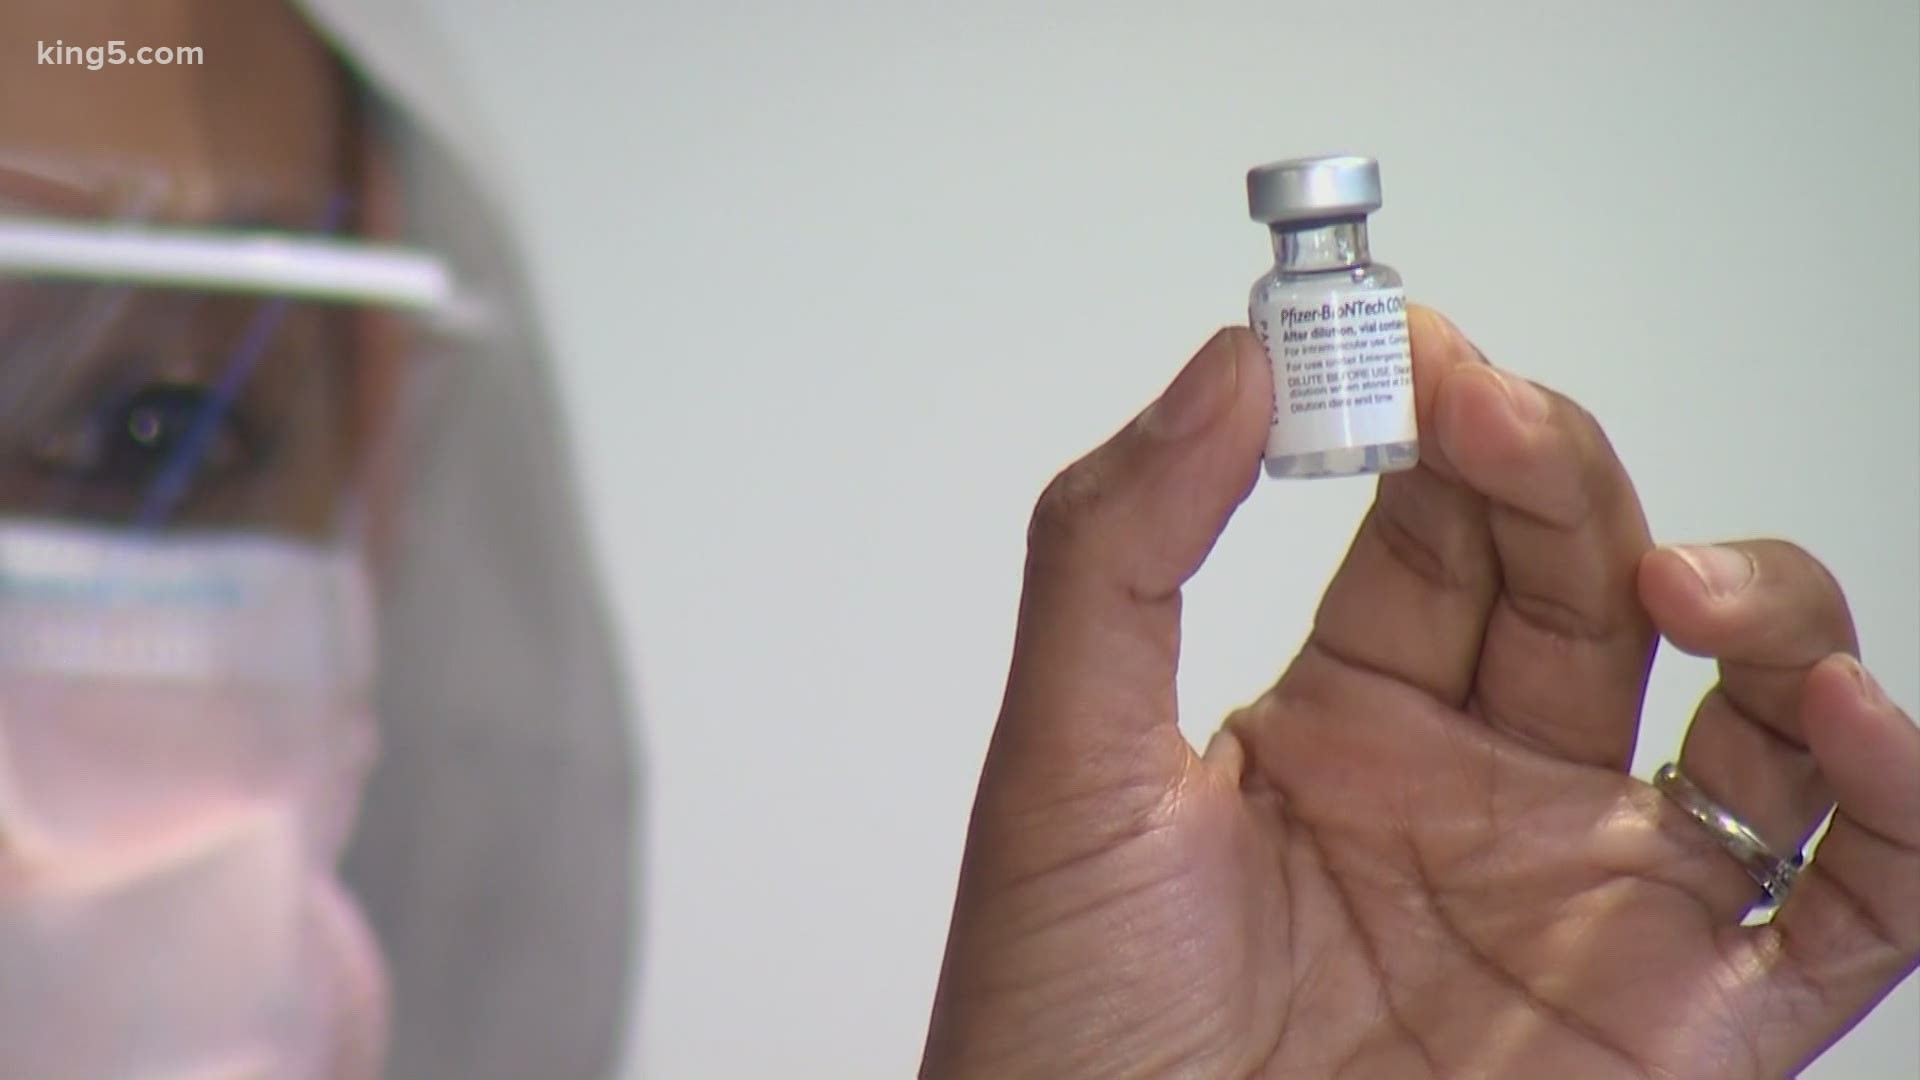 Doctors at some small clinics are frustrated with how long it’s taking for them to get COVID-19 vaccines: “It's a lot of dead ends."